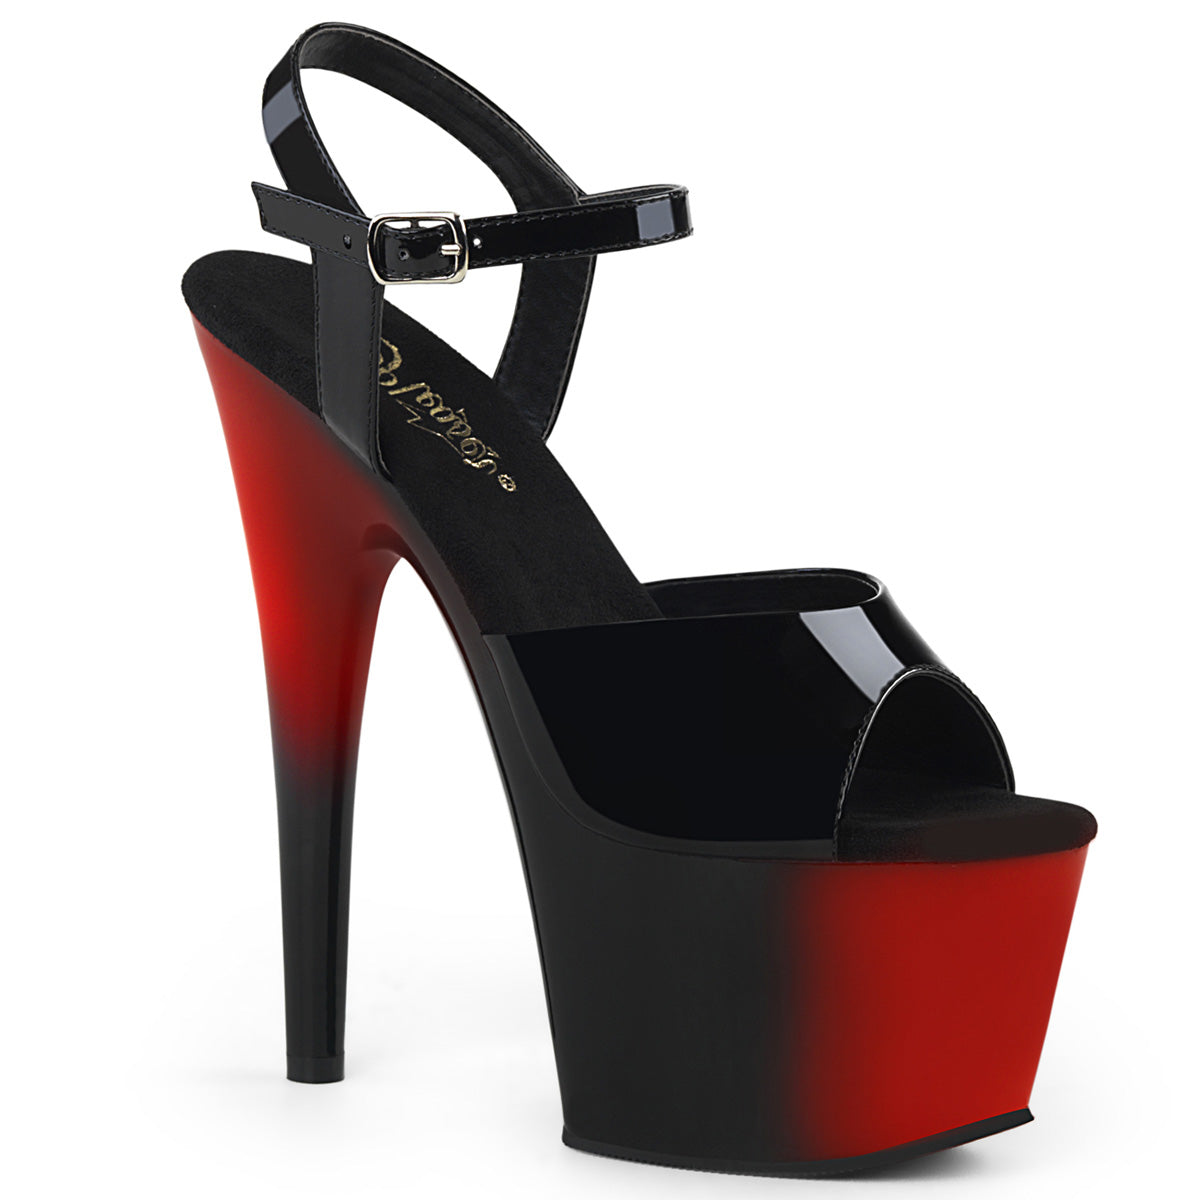 Pleaser Sandalias para mujer ADORE-709BR BLK PAT / RED-BLK